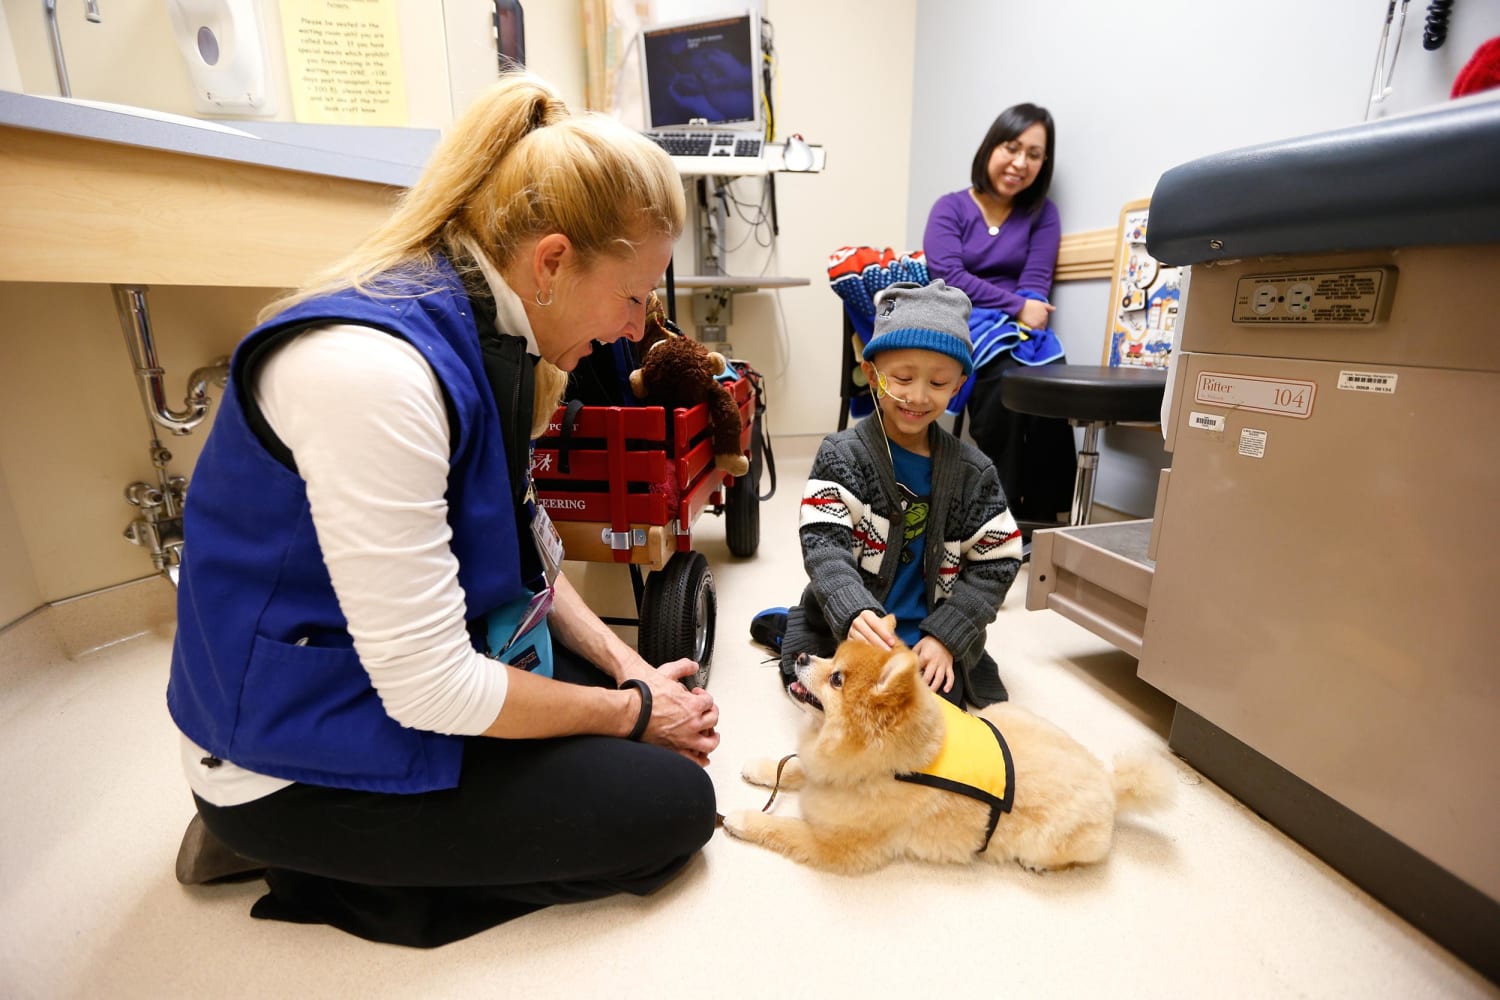 Puppy Love: Study Tests Power of Dogs Against Cancer